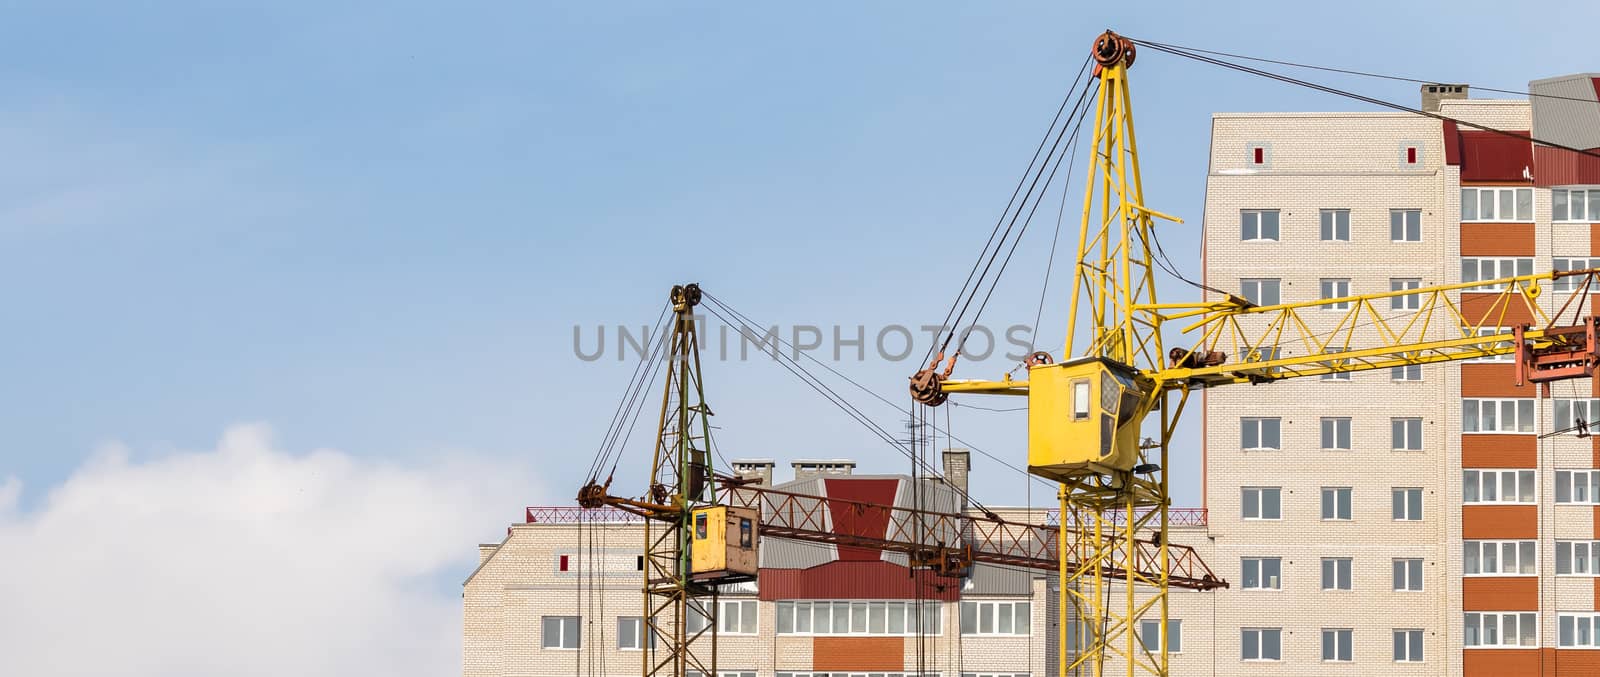 Construction site. Unfinished apartment buildings. Huge industrial cranes in the middle. Blue sky background.